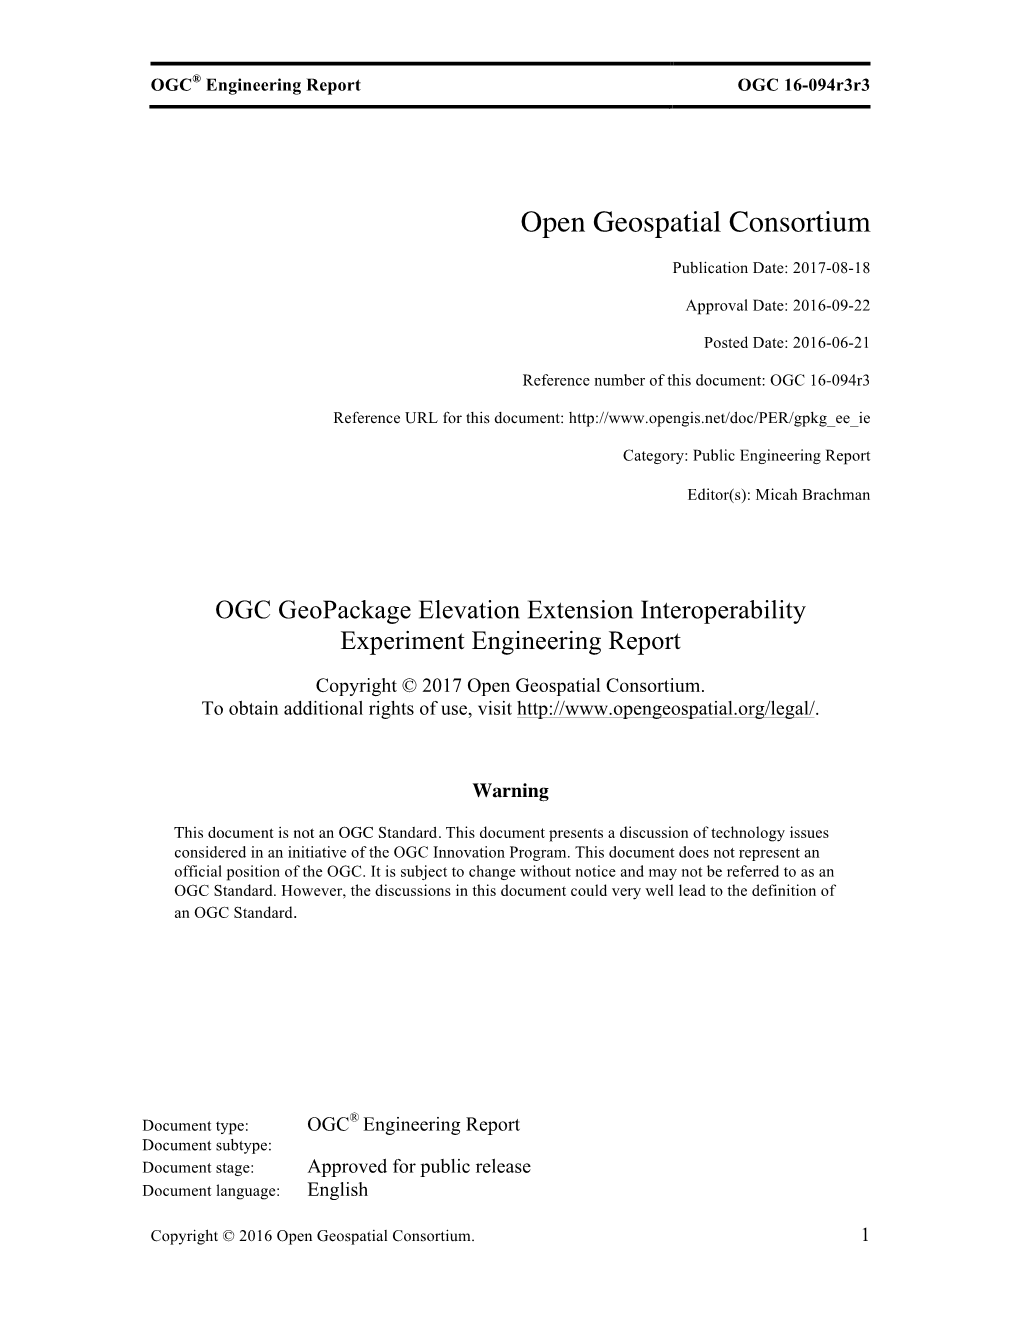 OGC Geopackage Elevation Extension Interoperability Experiment Engineering Report